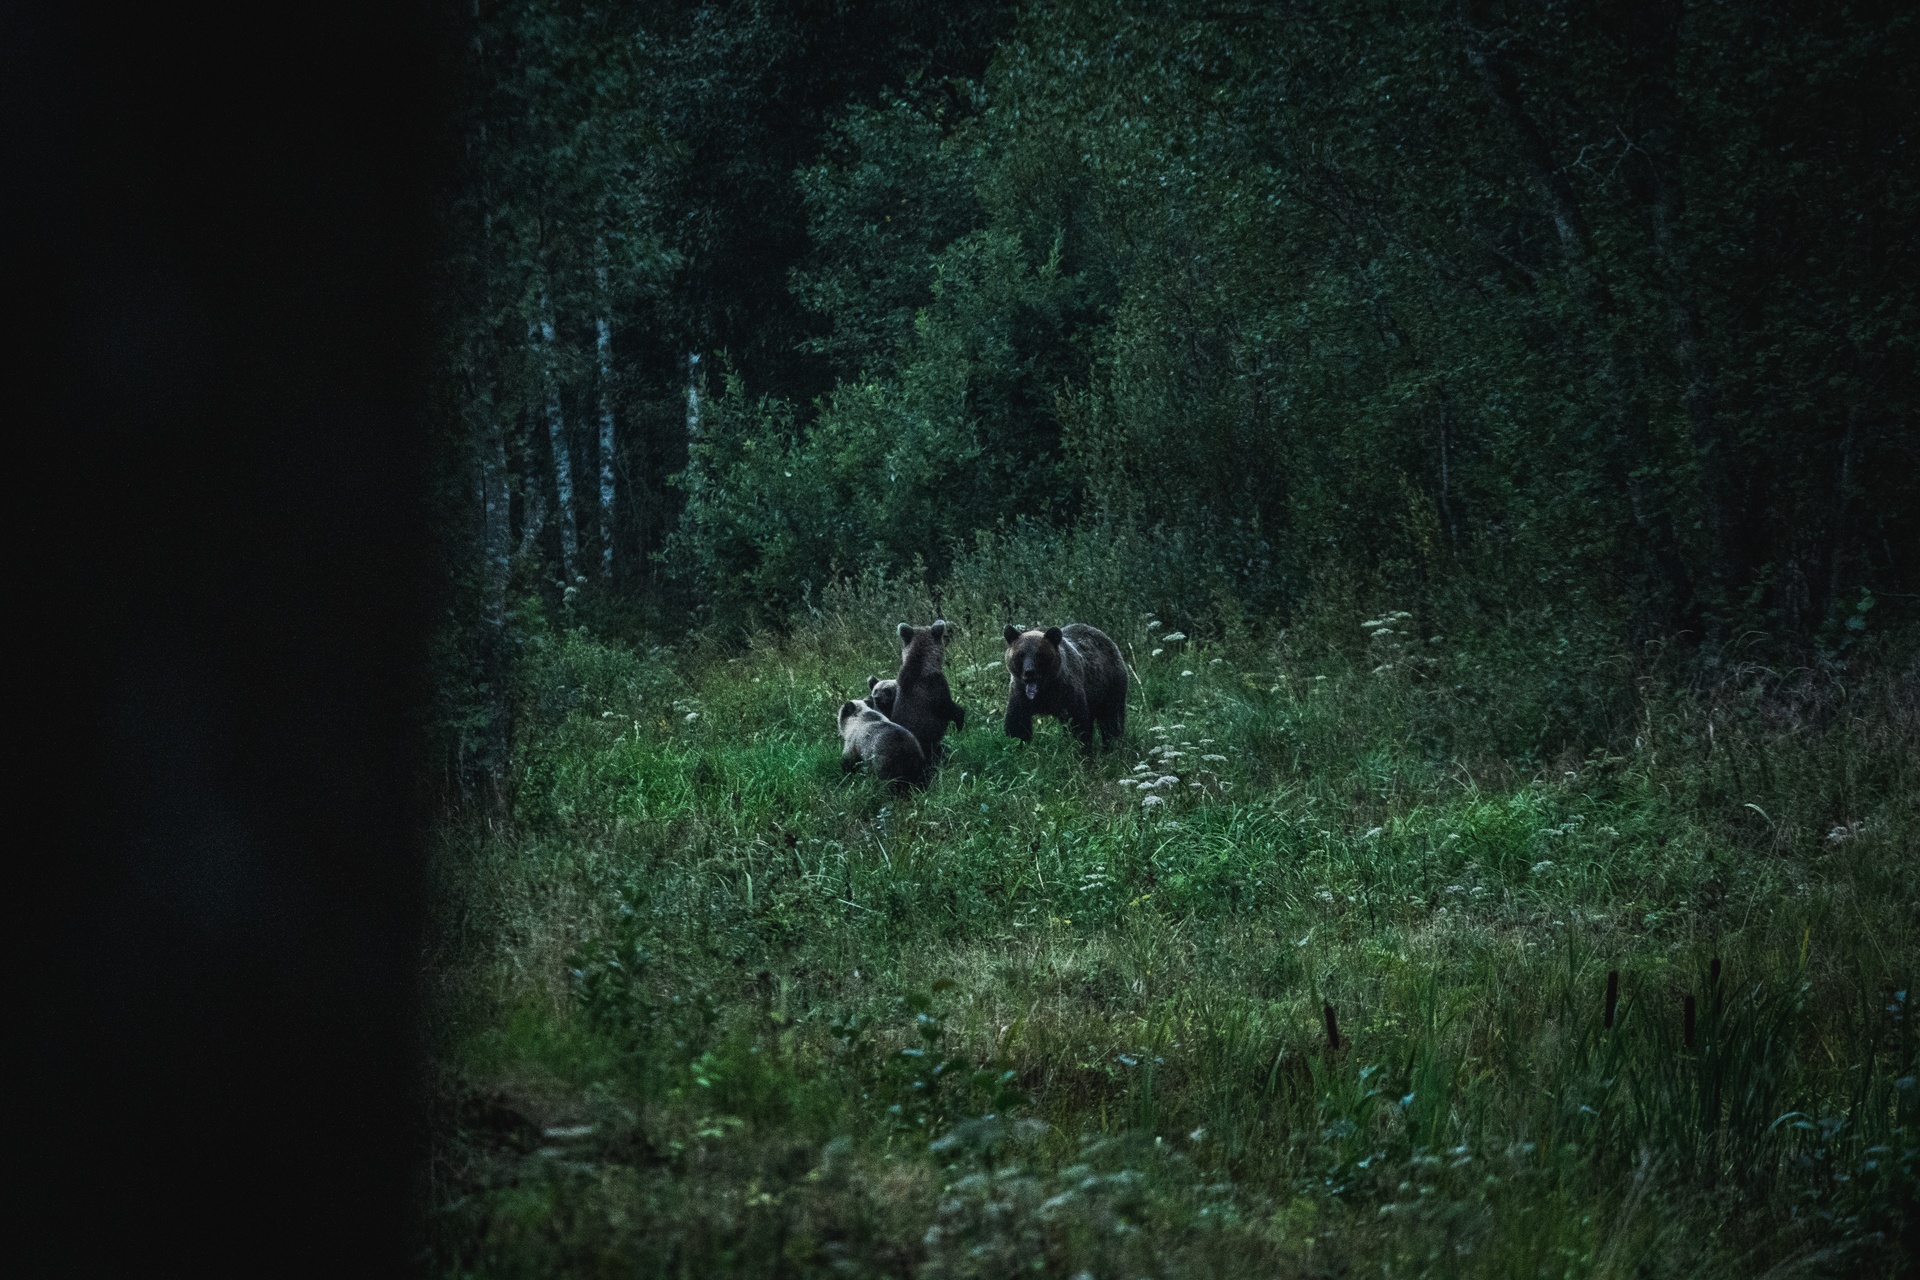 Mother bear and cubs in Estonia's Alutaguse National Park